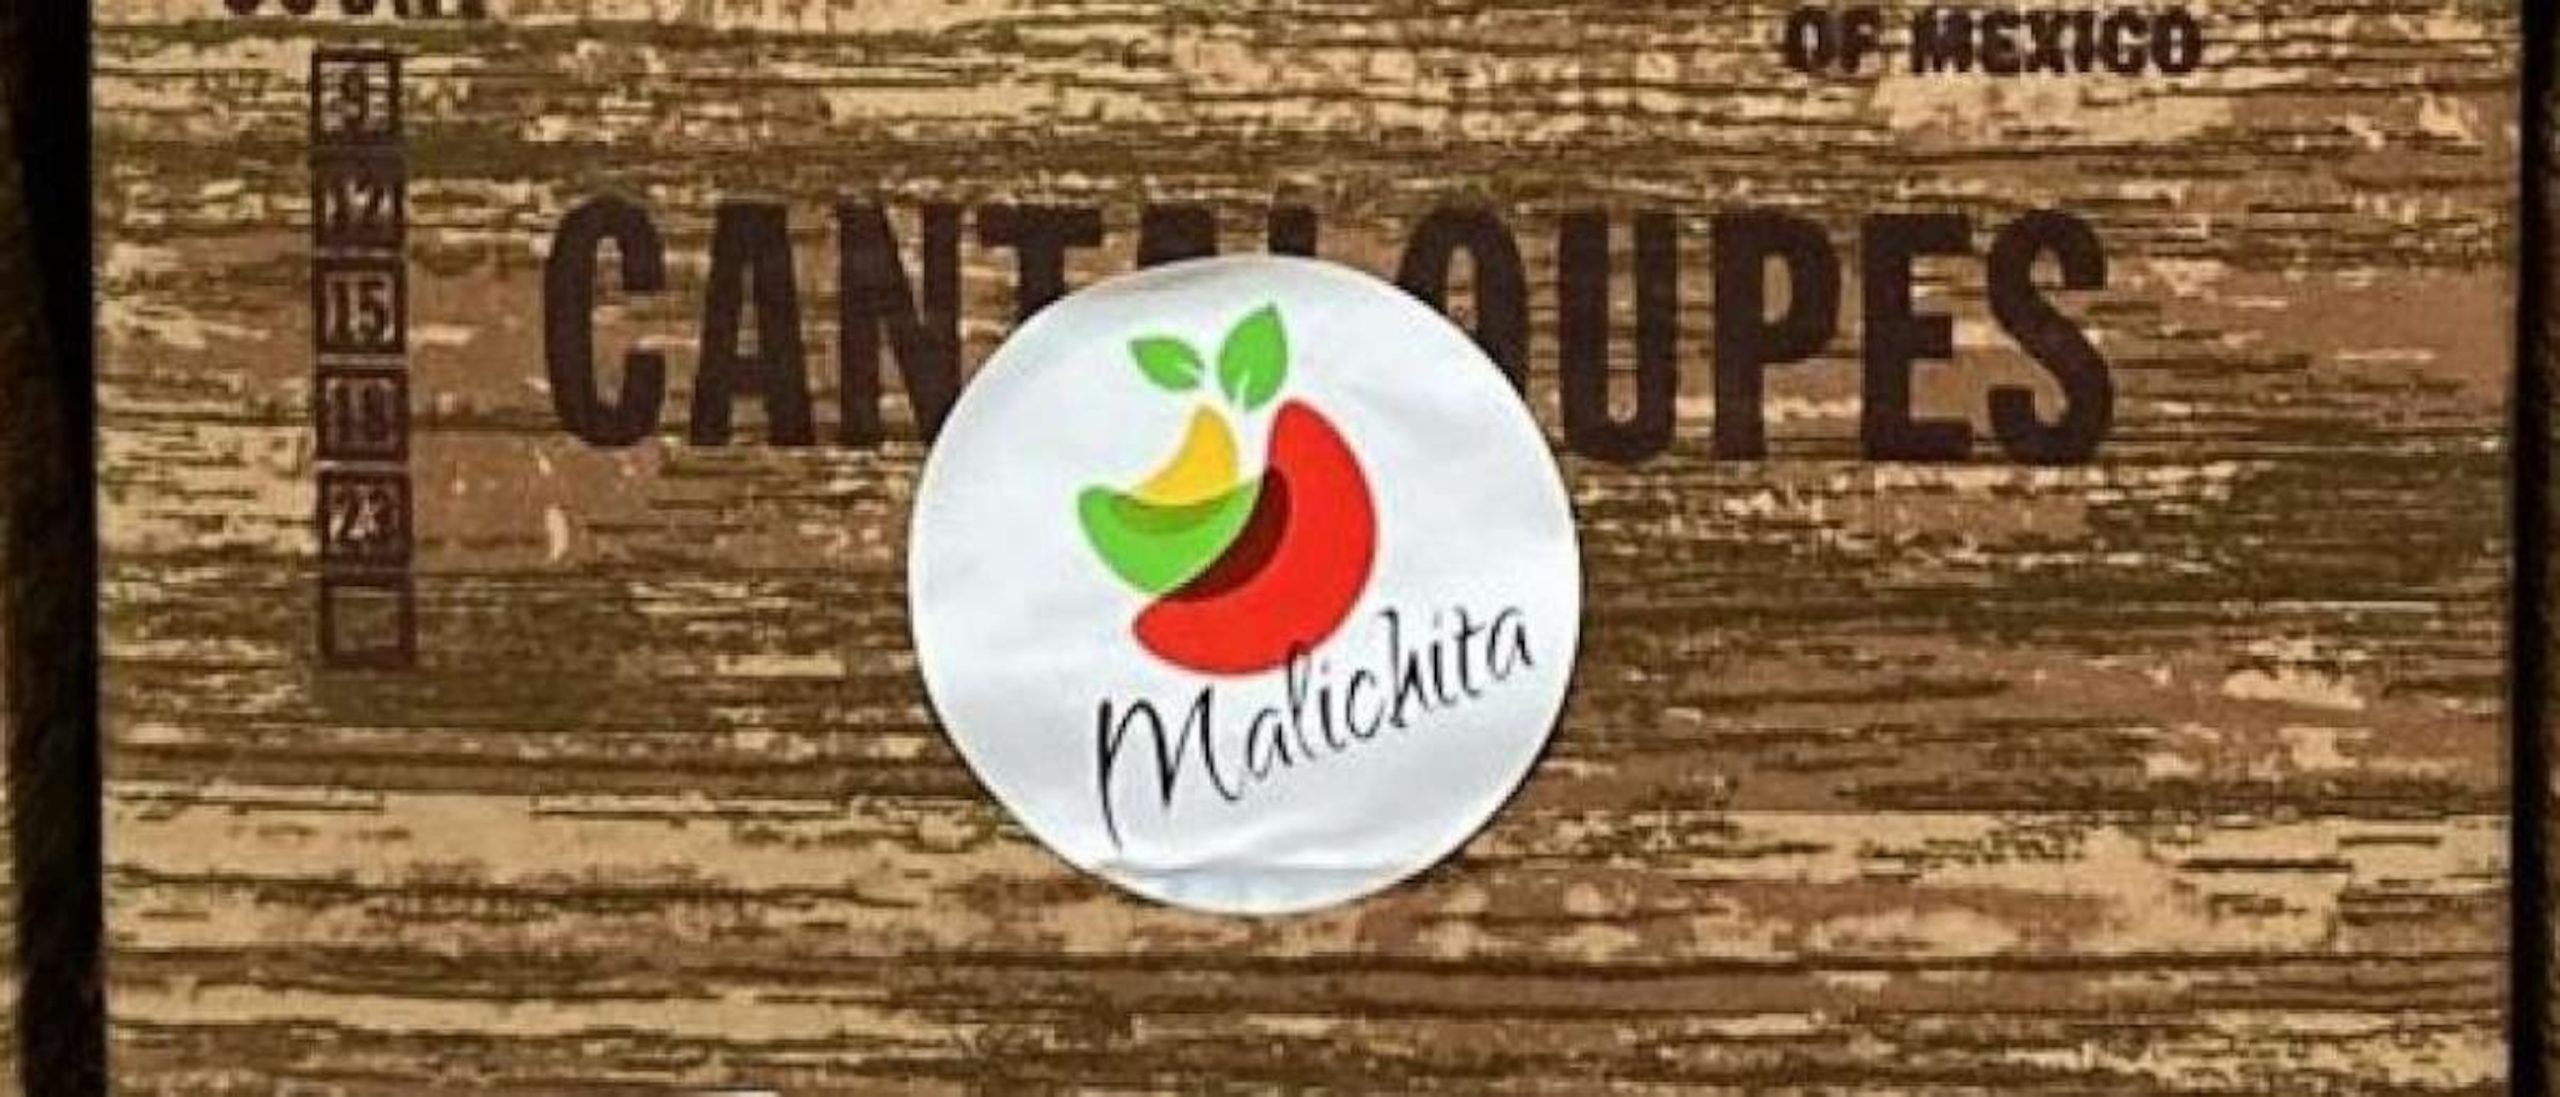 Cantaloupes with the "Malichita" label have been recalled.